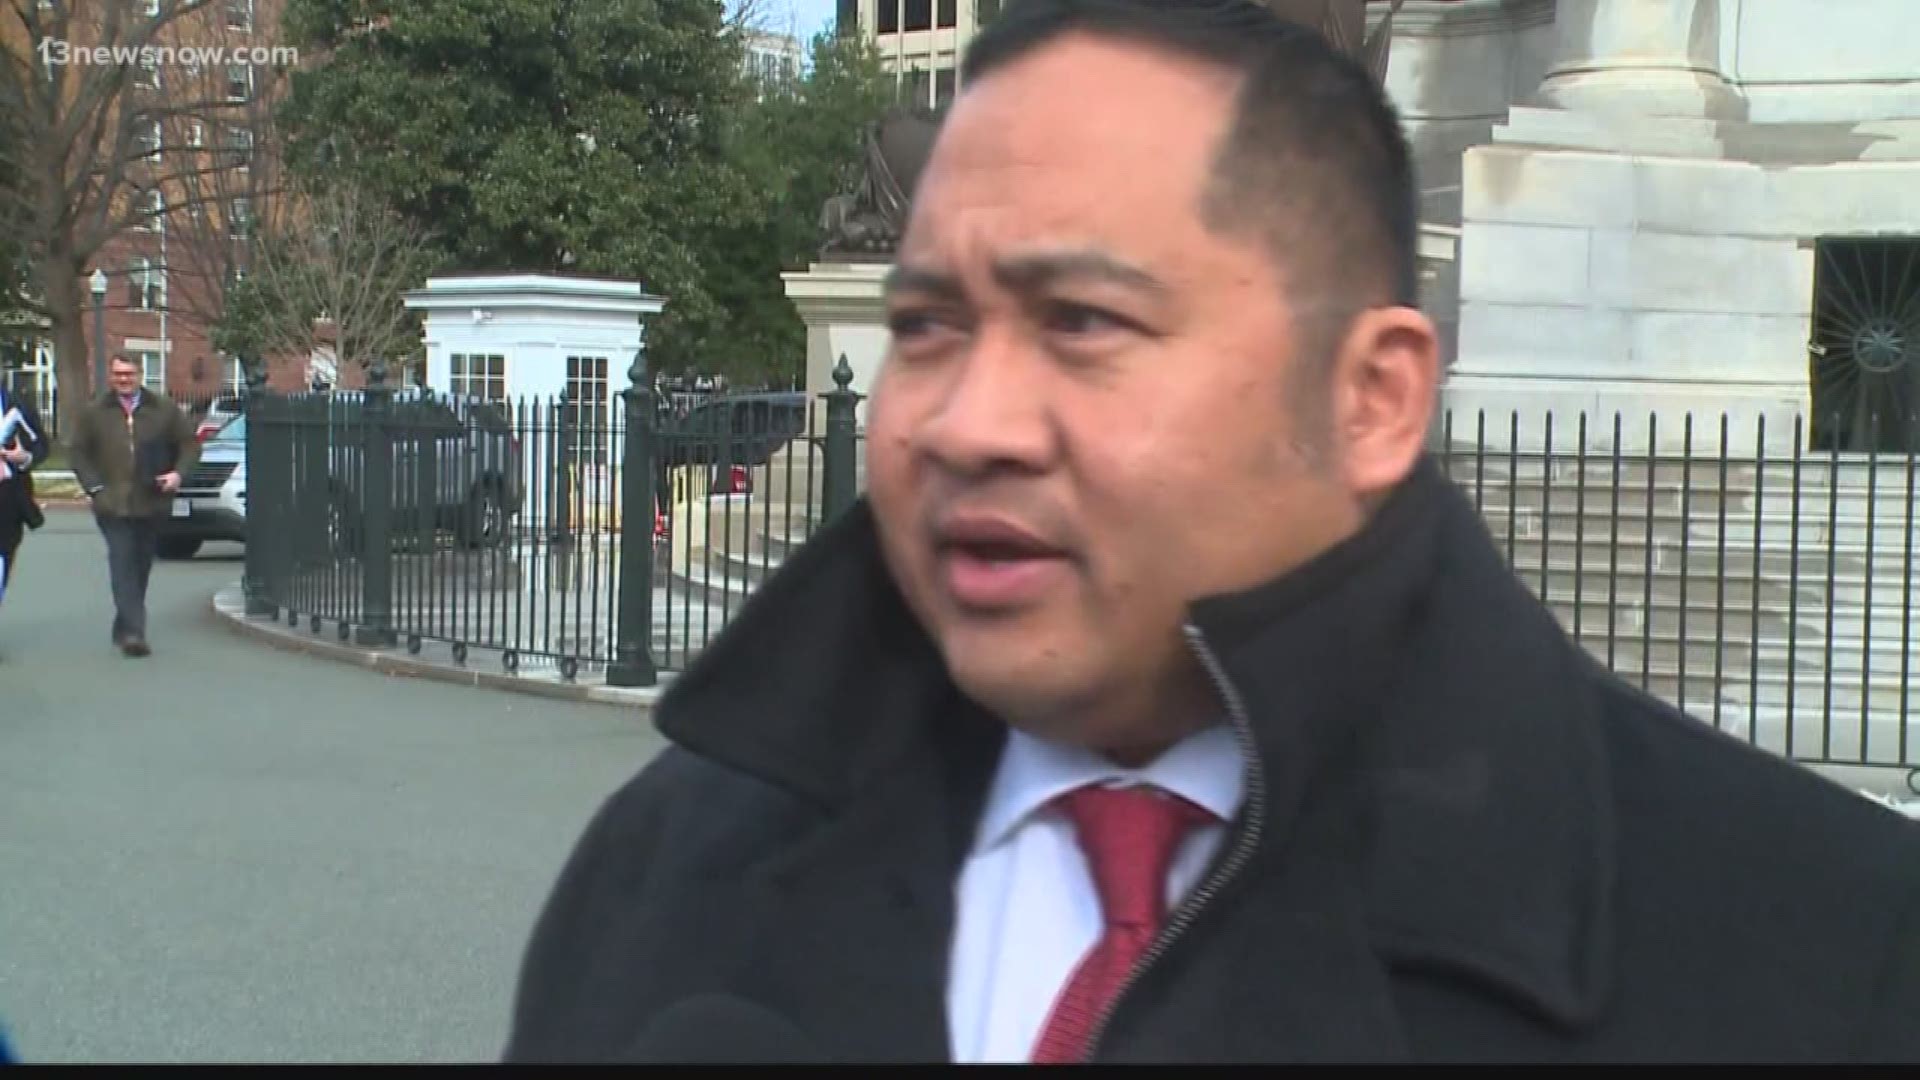 Ron Villanueva, a Former Virginia State Delegate, was indicted on fraud charges.